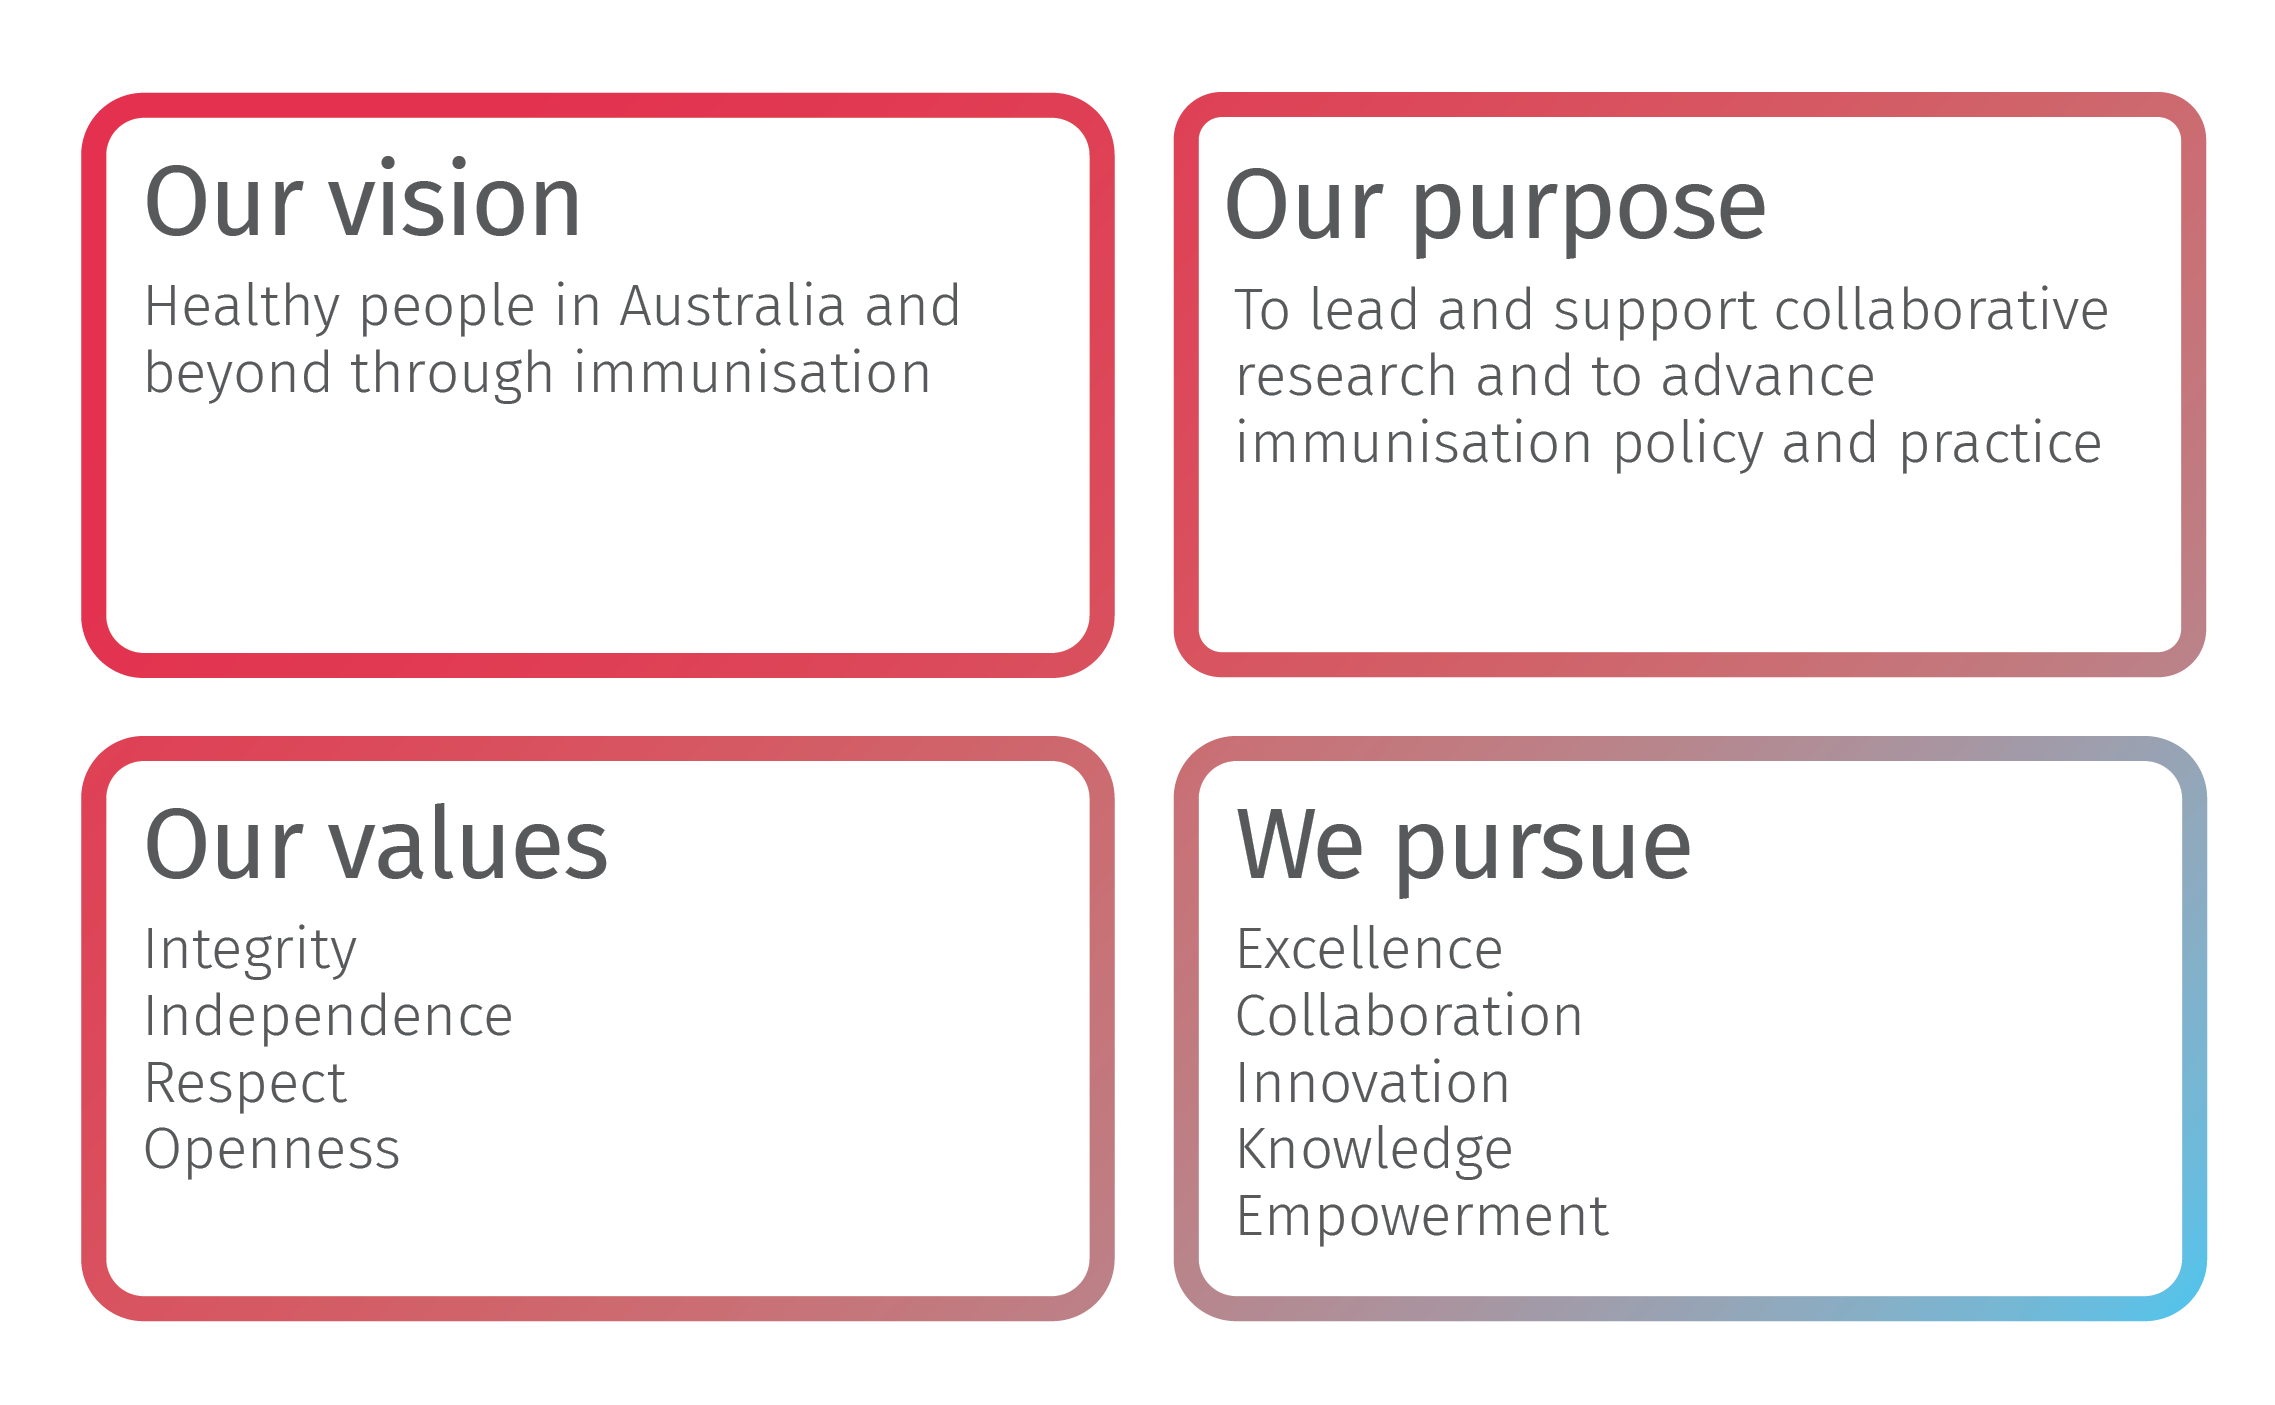 Our vision purpose and values